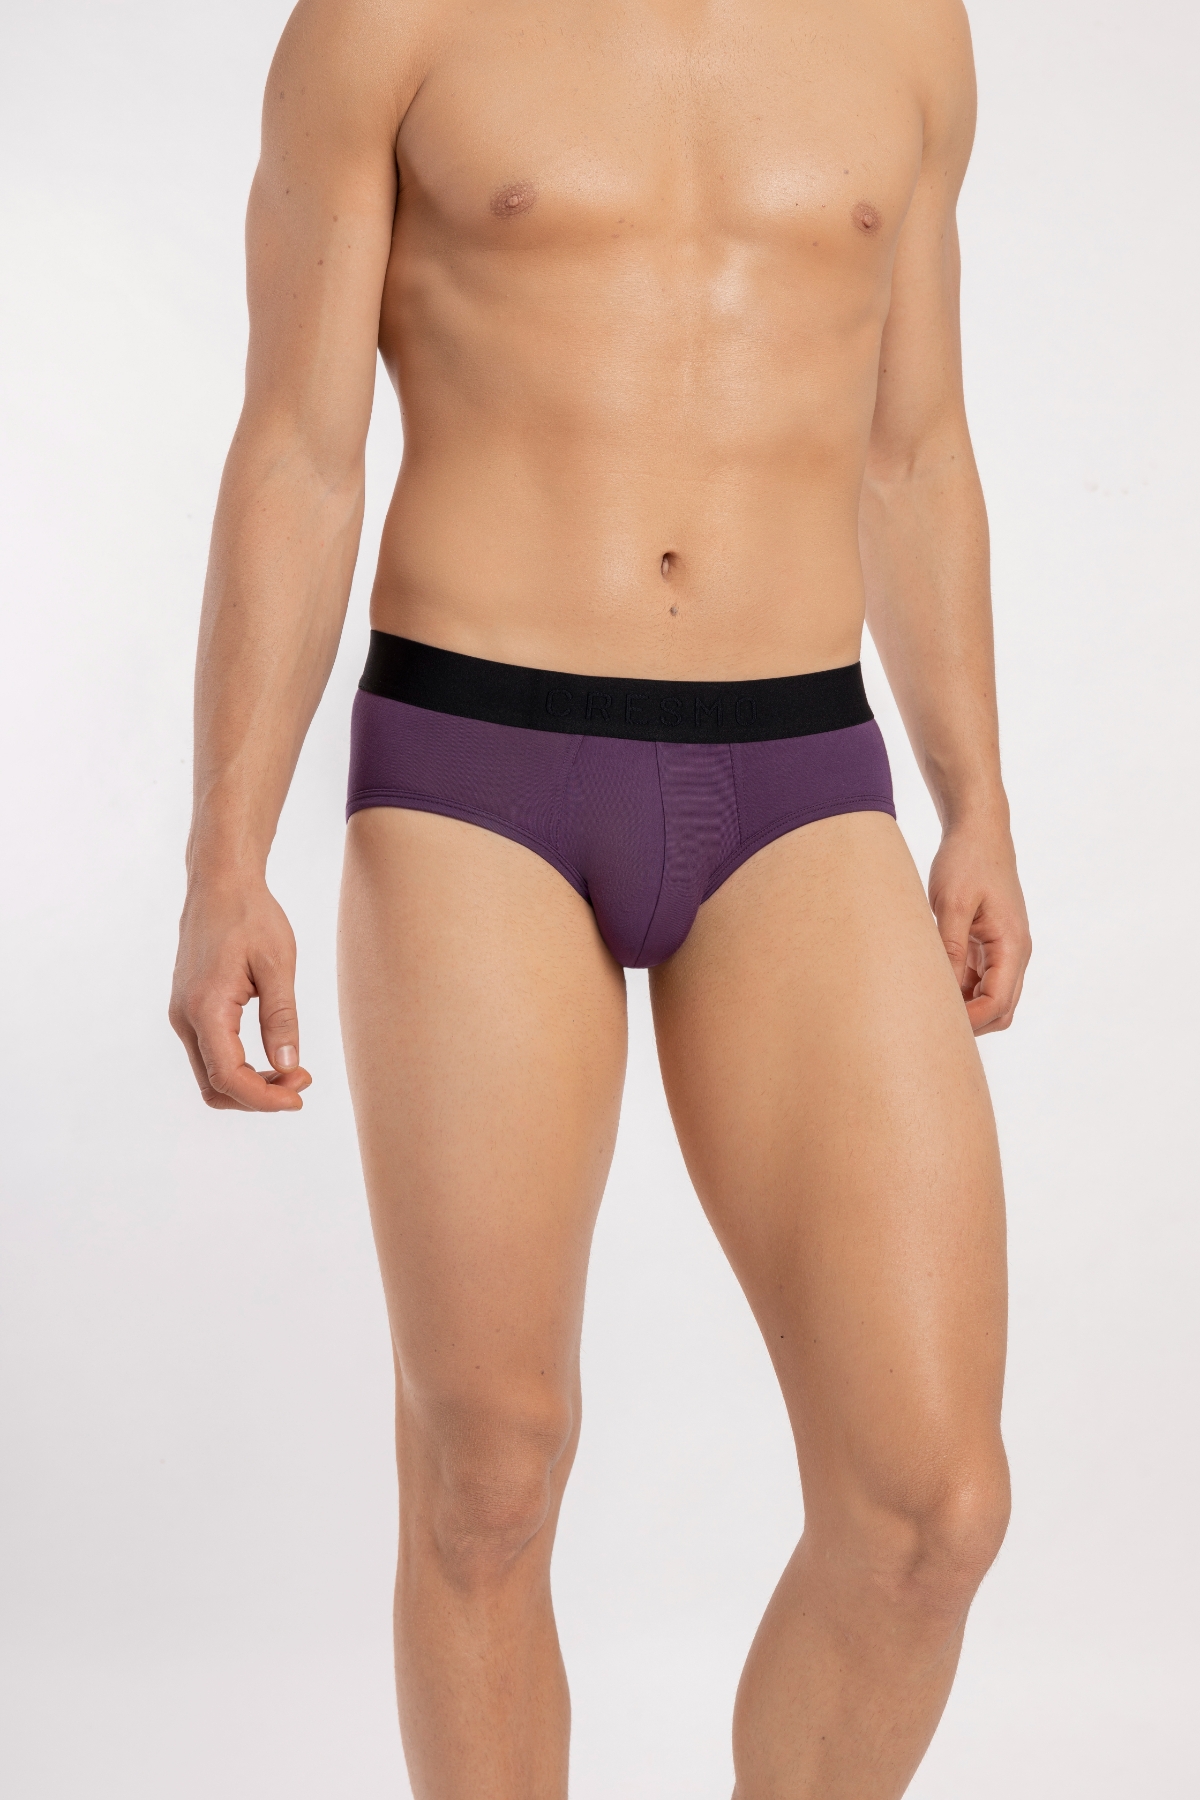 https://cdn.fynd.com/v2/falling-surf-7c8bb8/fyprod/wrkr/products/pictures/item/free/original/obFrCSKiq-CRESMO-Mens-Luxury-Anti-Microbial-Micro-Modal-Underwear-Breathable-Ultra-Soft-Comfort-Lightweight-Brief.jpeg